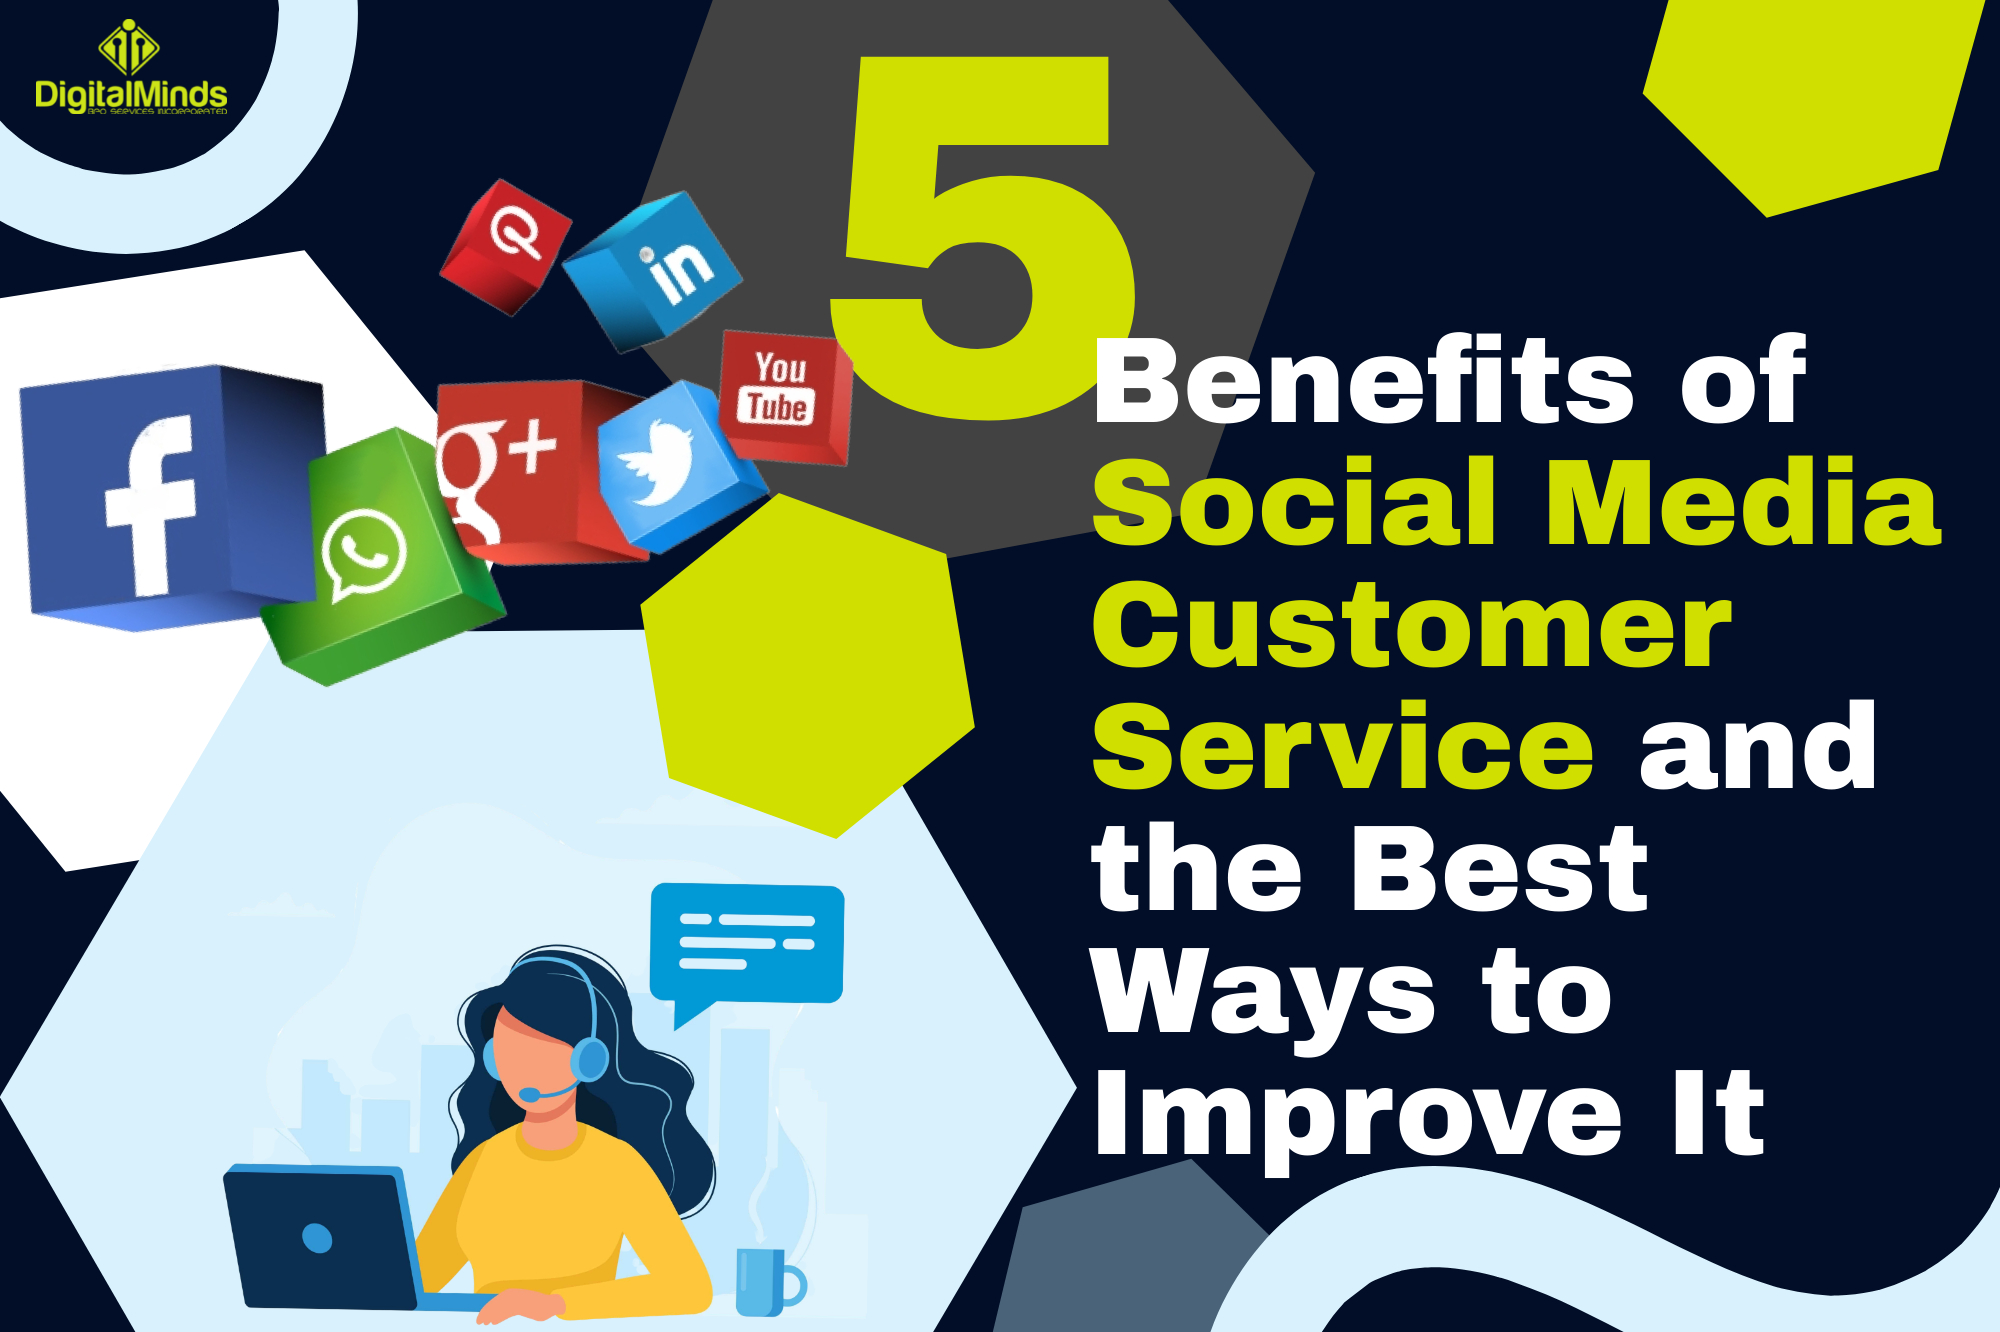 Infographic highlighting 5 benefits of social media customer service with tips for enhancement, featuring popular social media icons and a customer service representative.